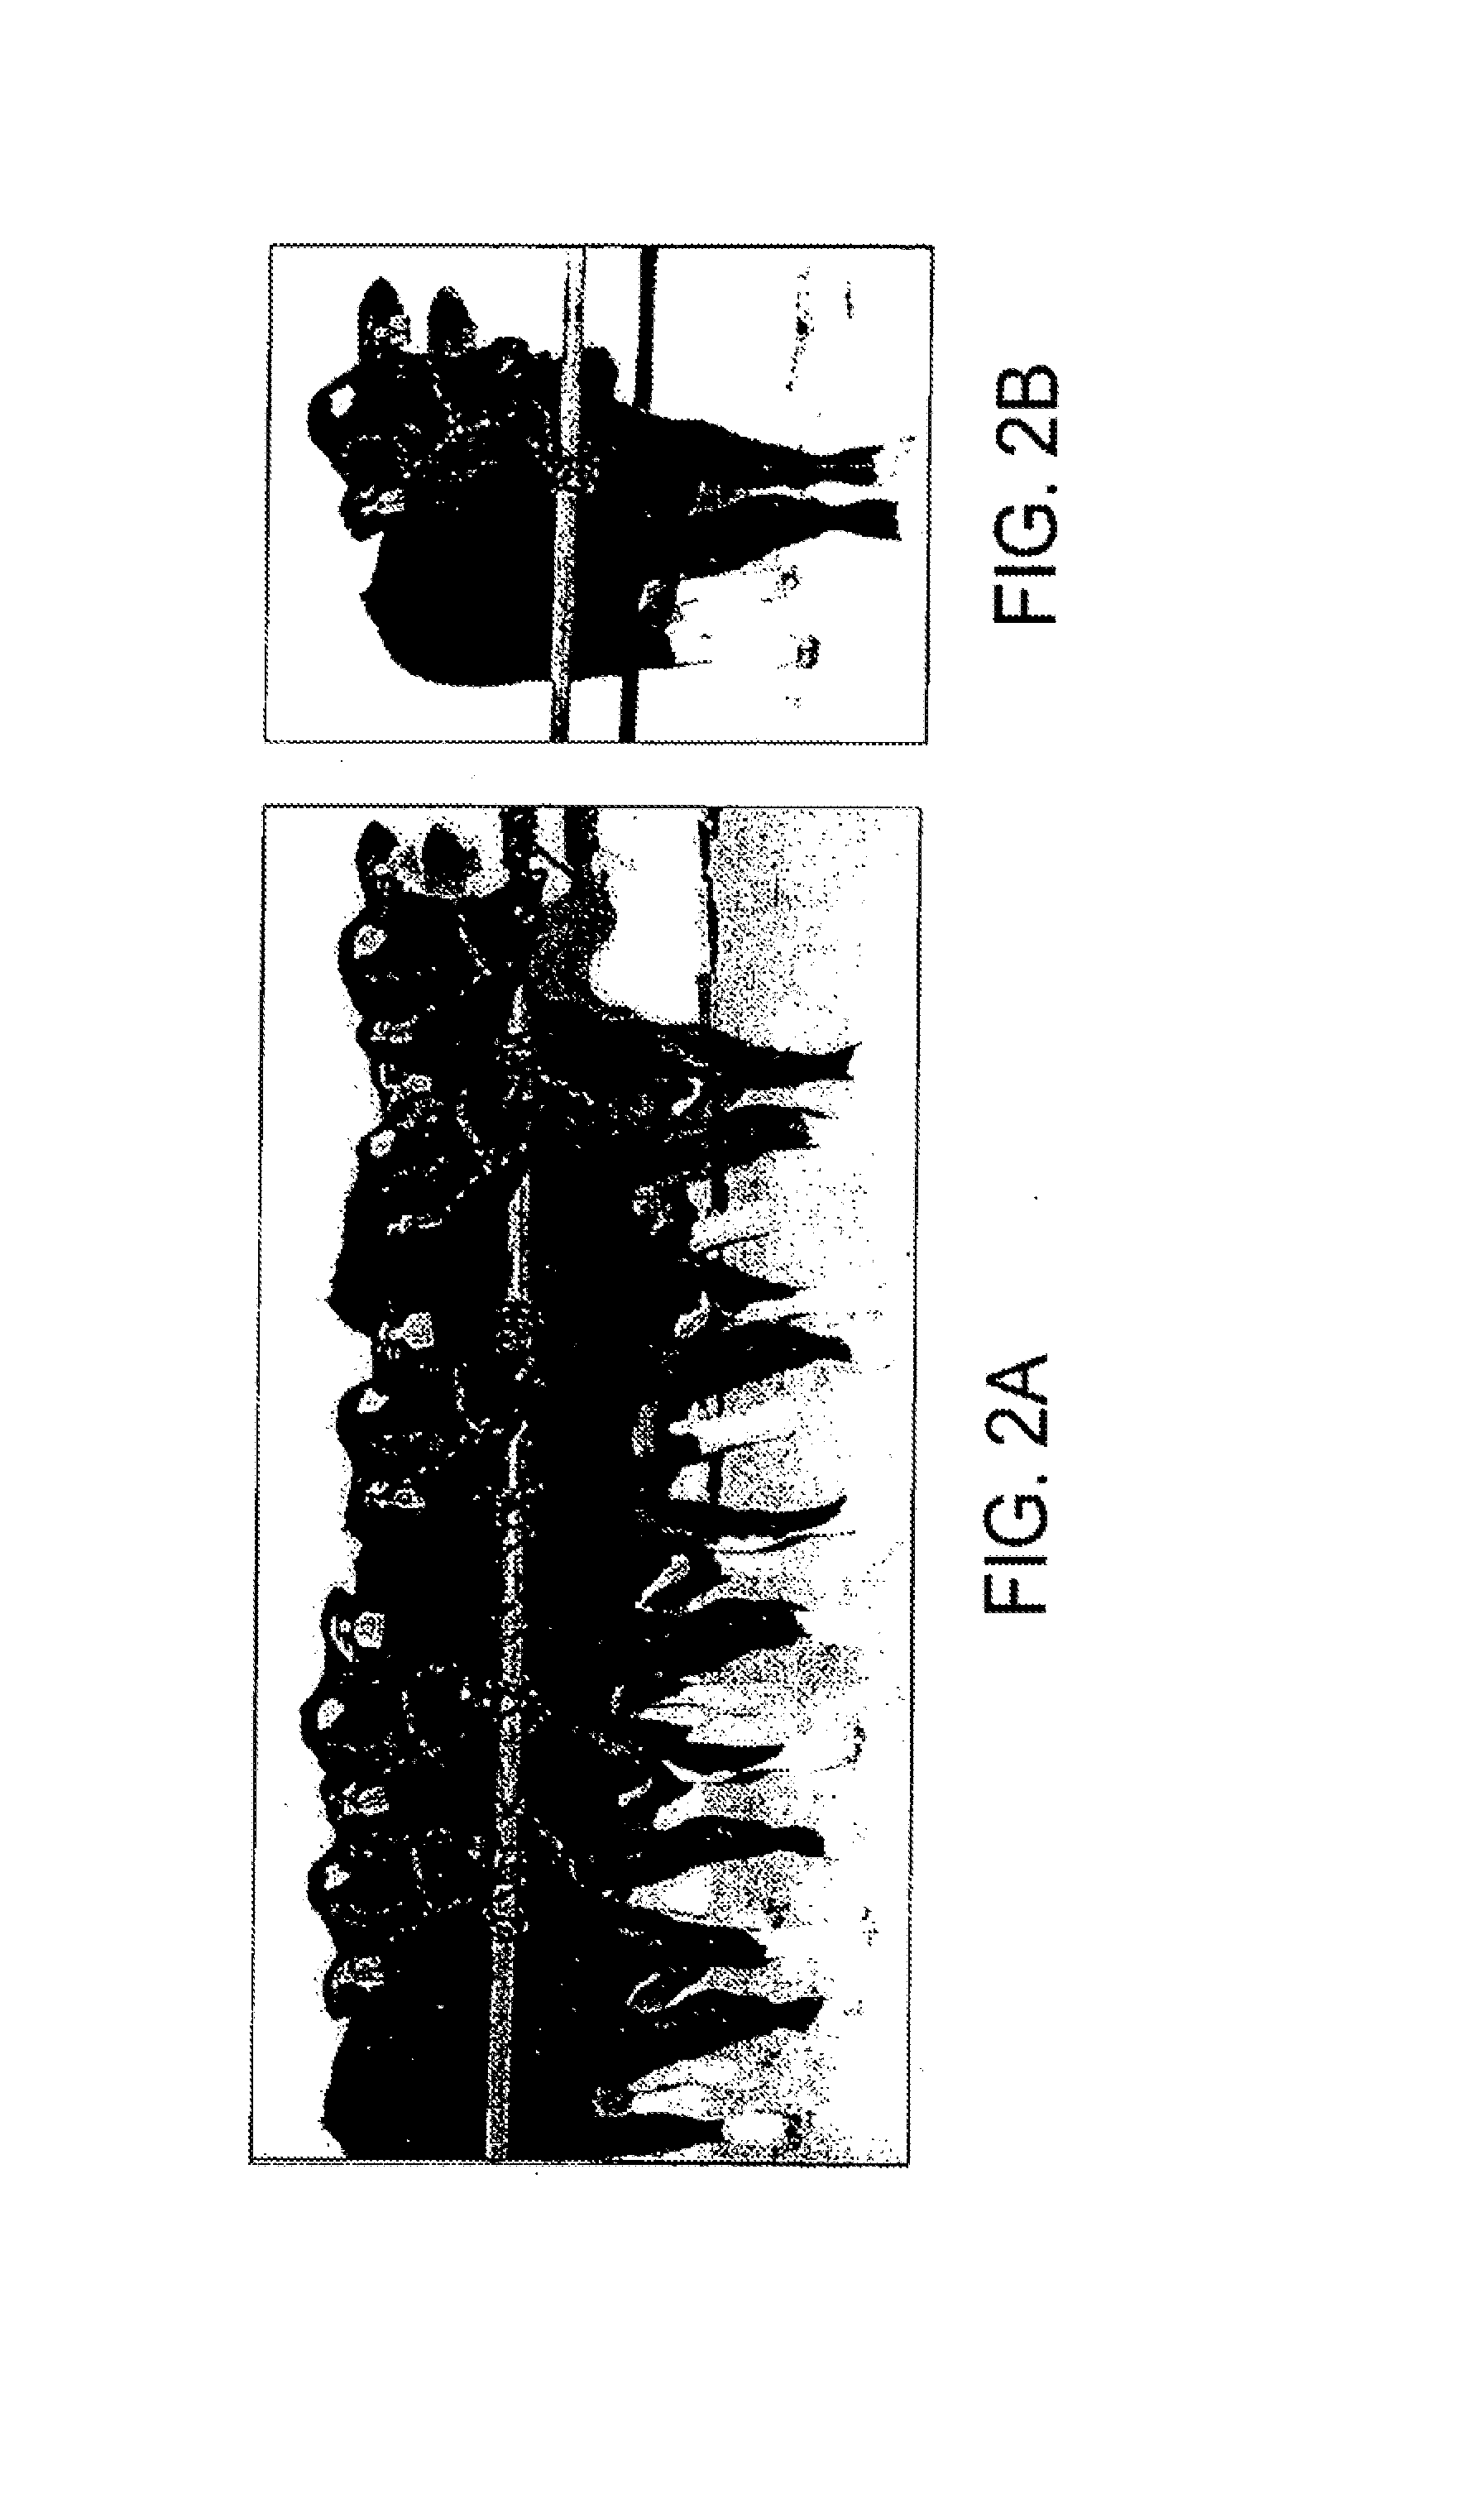 Methods of repairing tandemly repeated DNA sequences and extending cell life-span using nuclear transfer